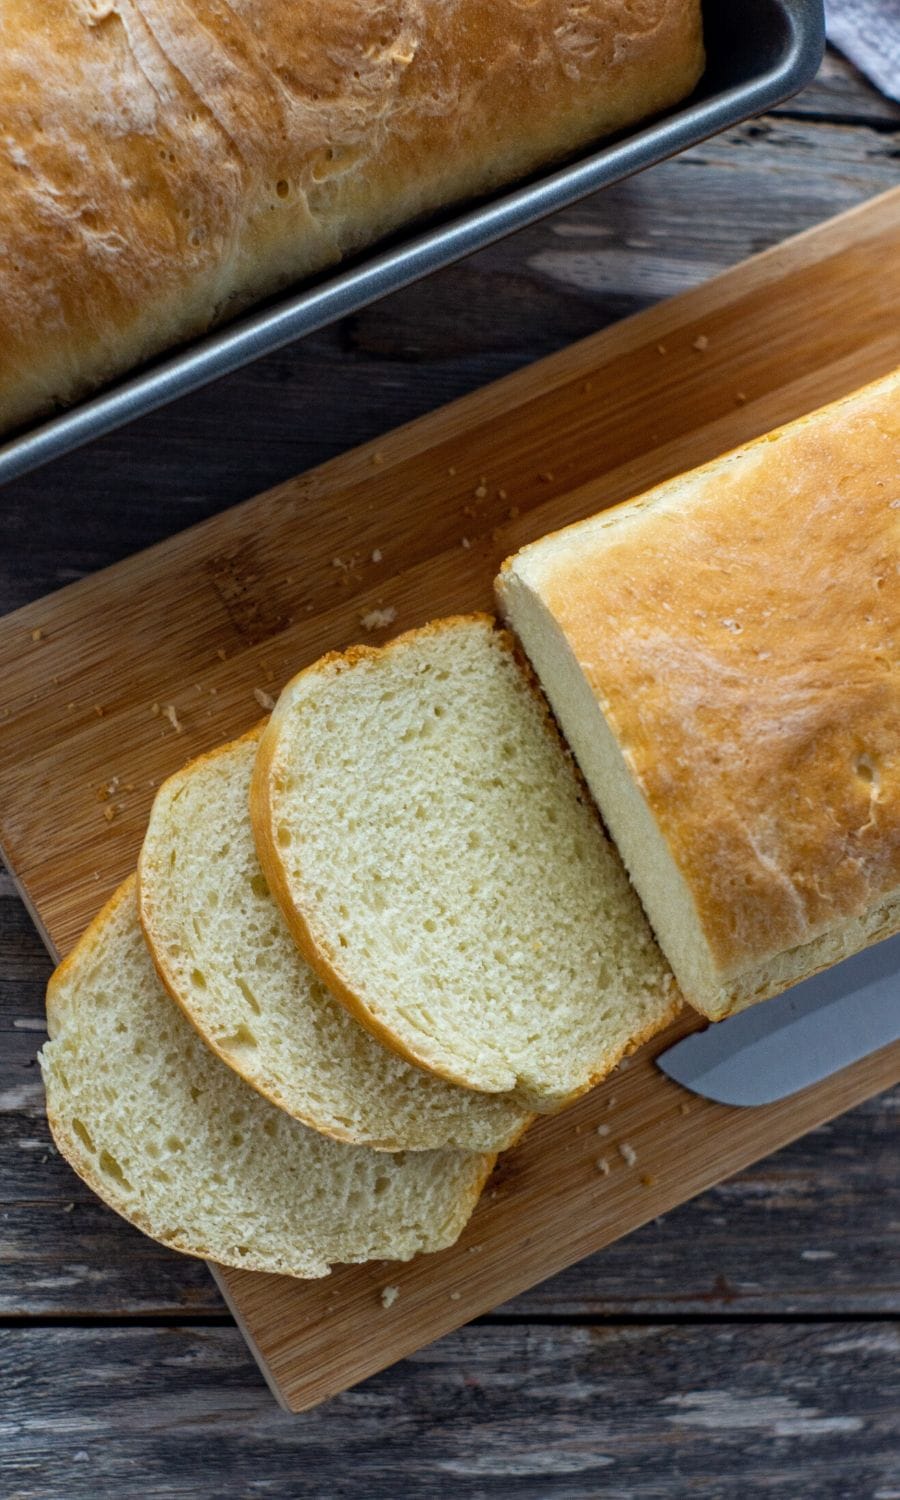 Whether it is out of necessity or for comfort, bread making has become really popular in recent months. This simple Homemade Honey Bread Recipe is a terrific sandwich bread. It is a basic yeast bread that is slightly sweetened with honey and very easy to make. This homemade bread truly has the most amazing flavor. Better than store bought, this bakery-style sandwich bread is something you have to make.